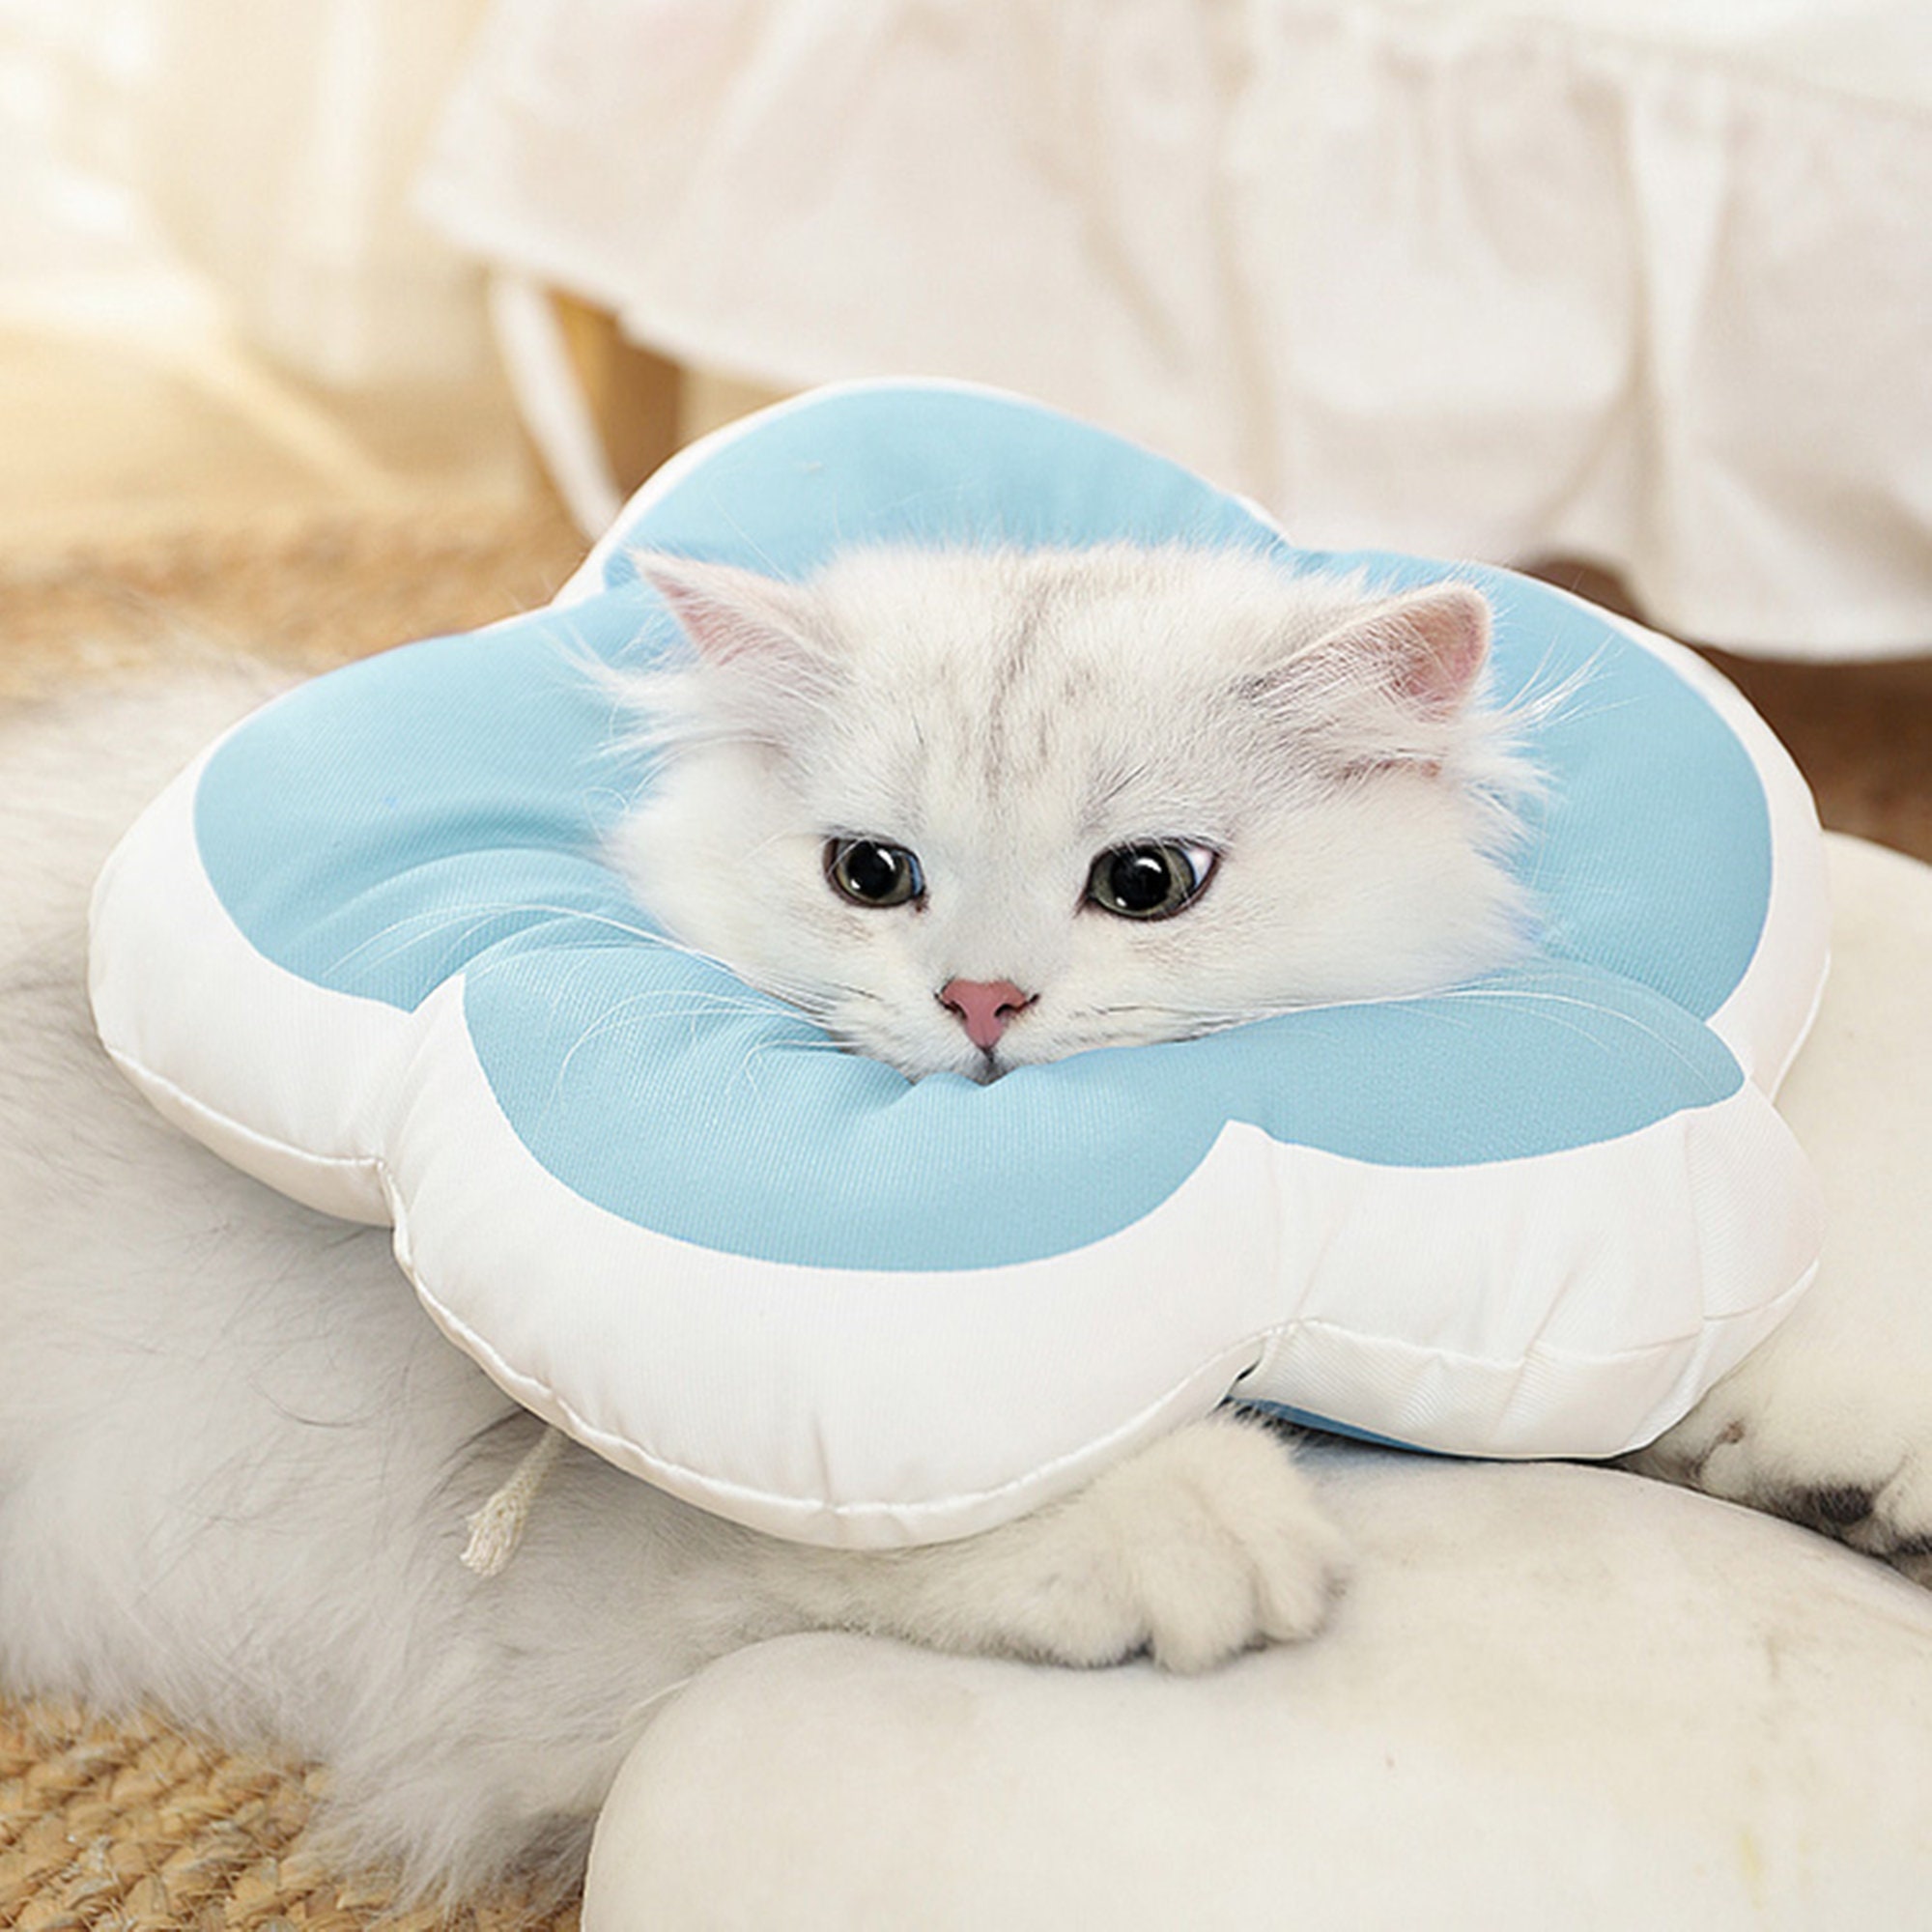 tiopeia Soft Recovery Cone Collar After Surgery Wound Protective Soft Edge Elizabethan Collar for Pets Kitten Small Dogs and Medium Dogs 